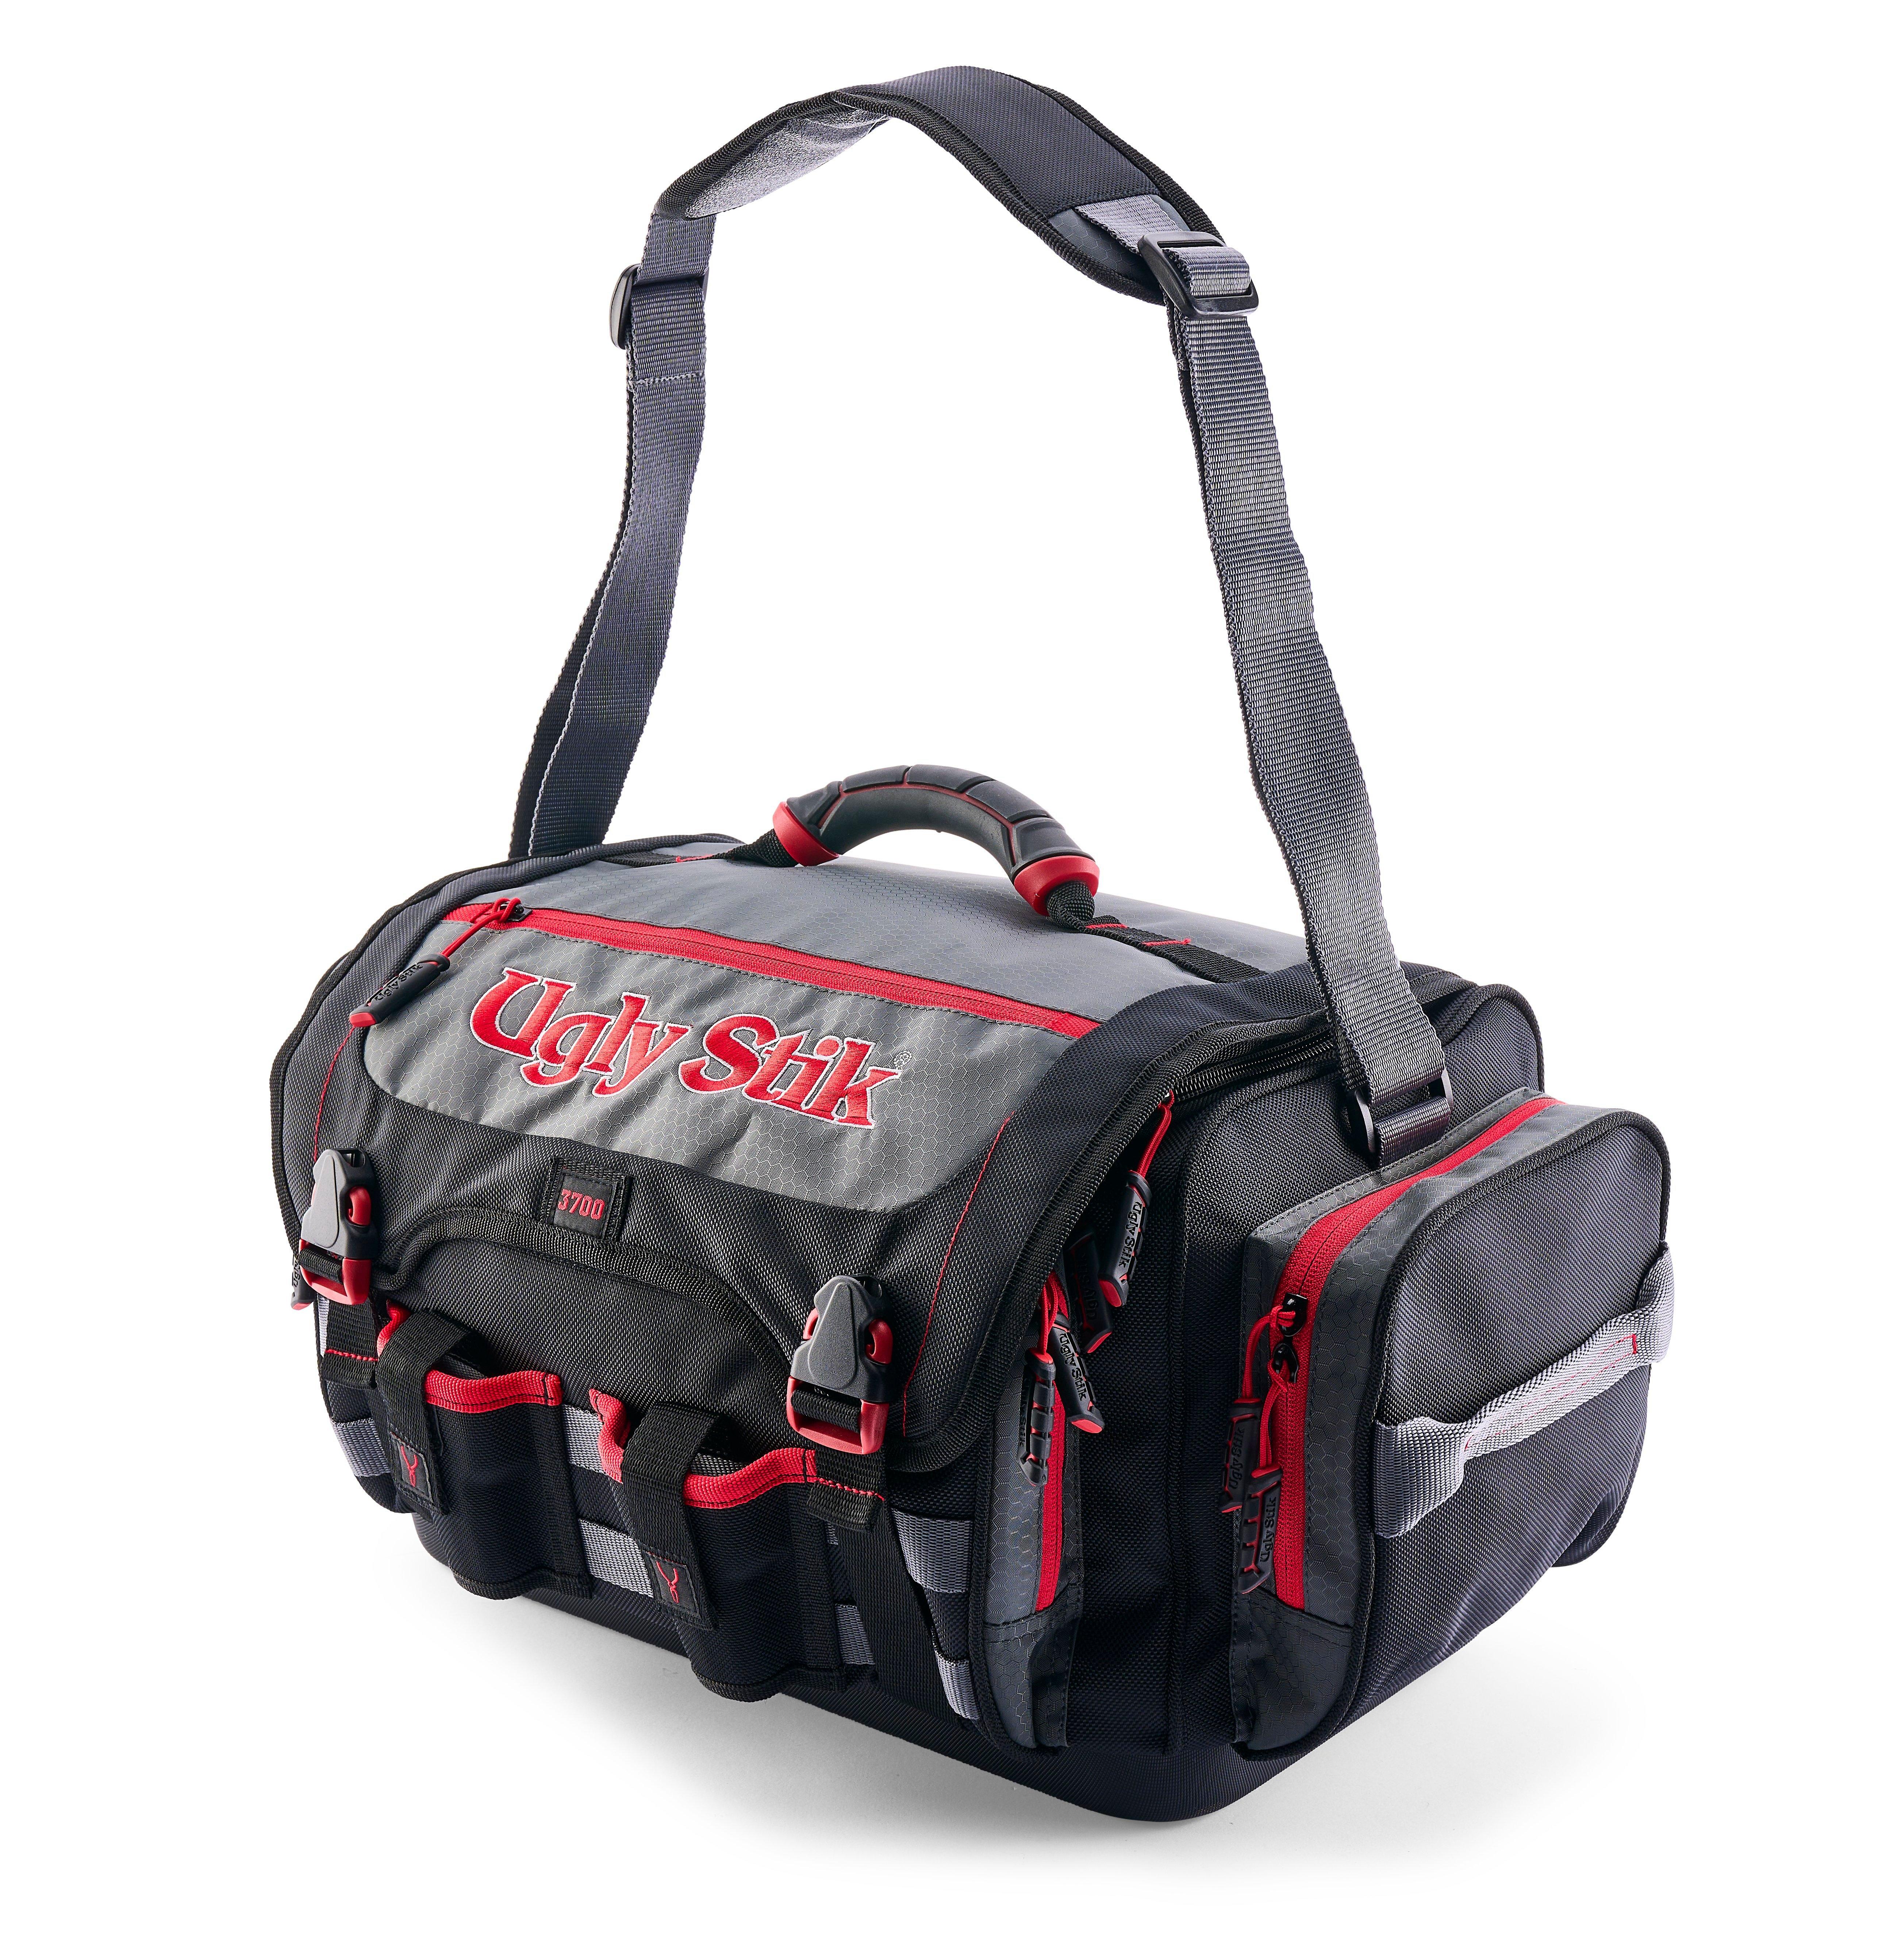 Ugly Stik 3700 Deluxe Backpack - Fin-atics Marine Supply Ltd. Inc.